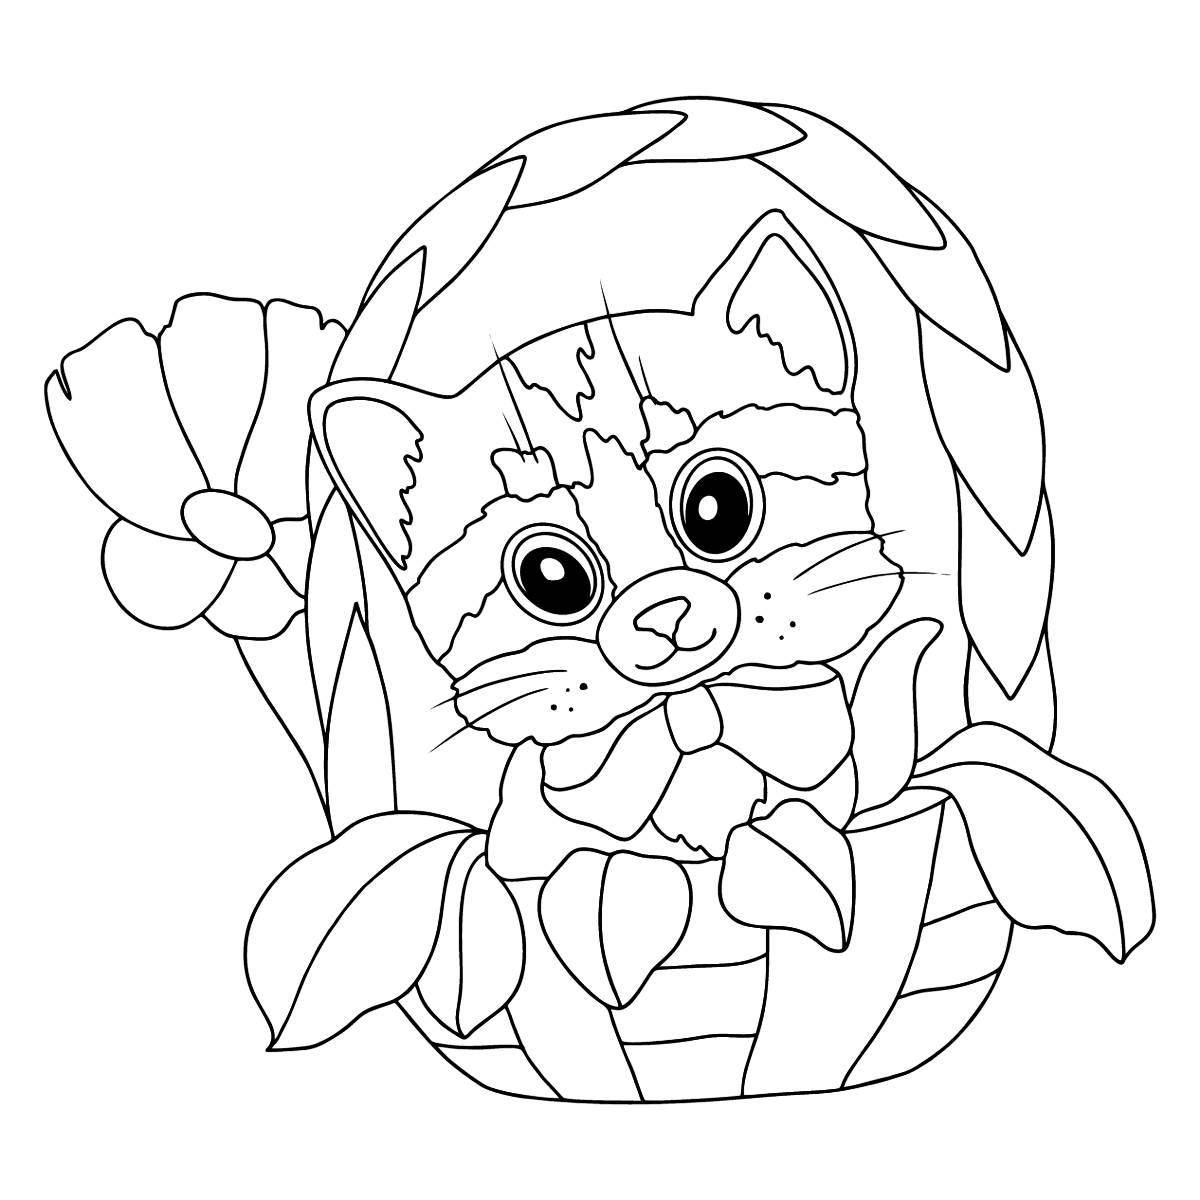 Coloring page adorable cat in a basket